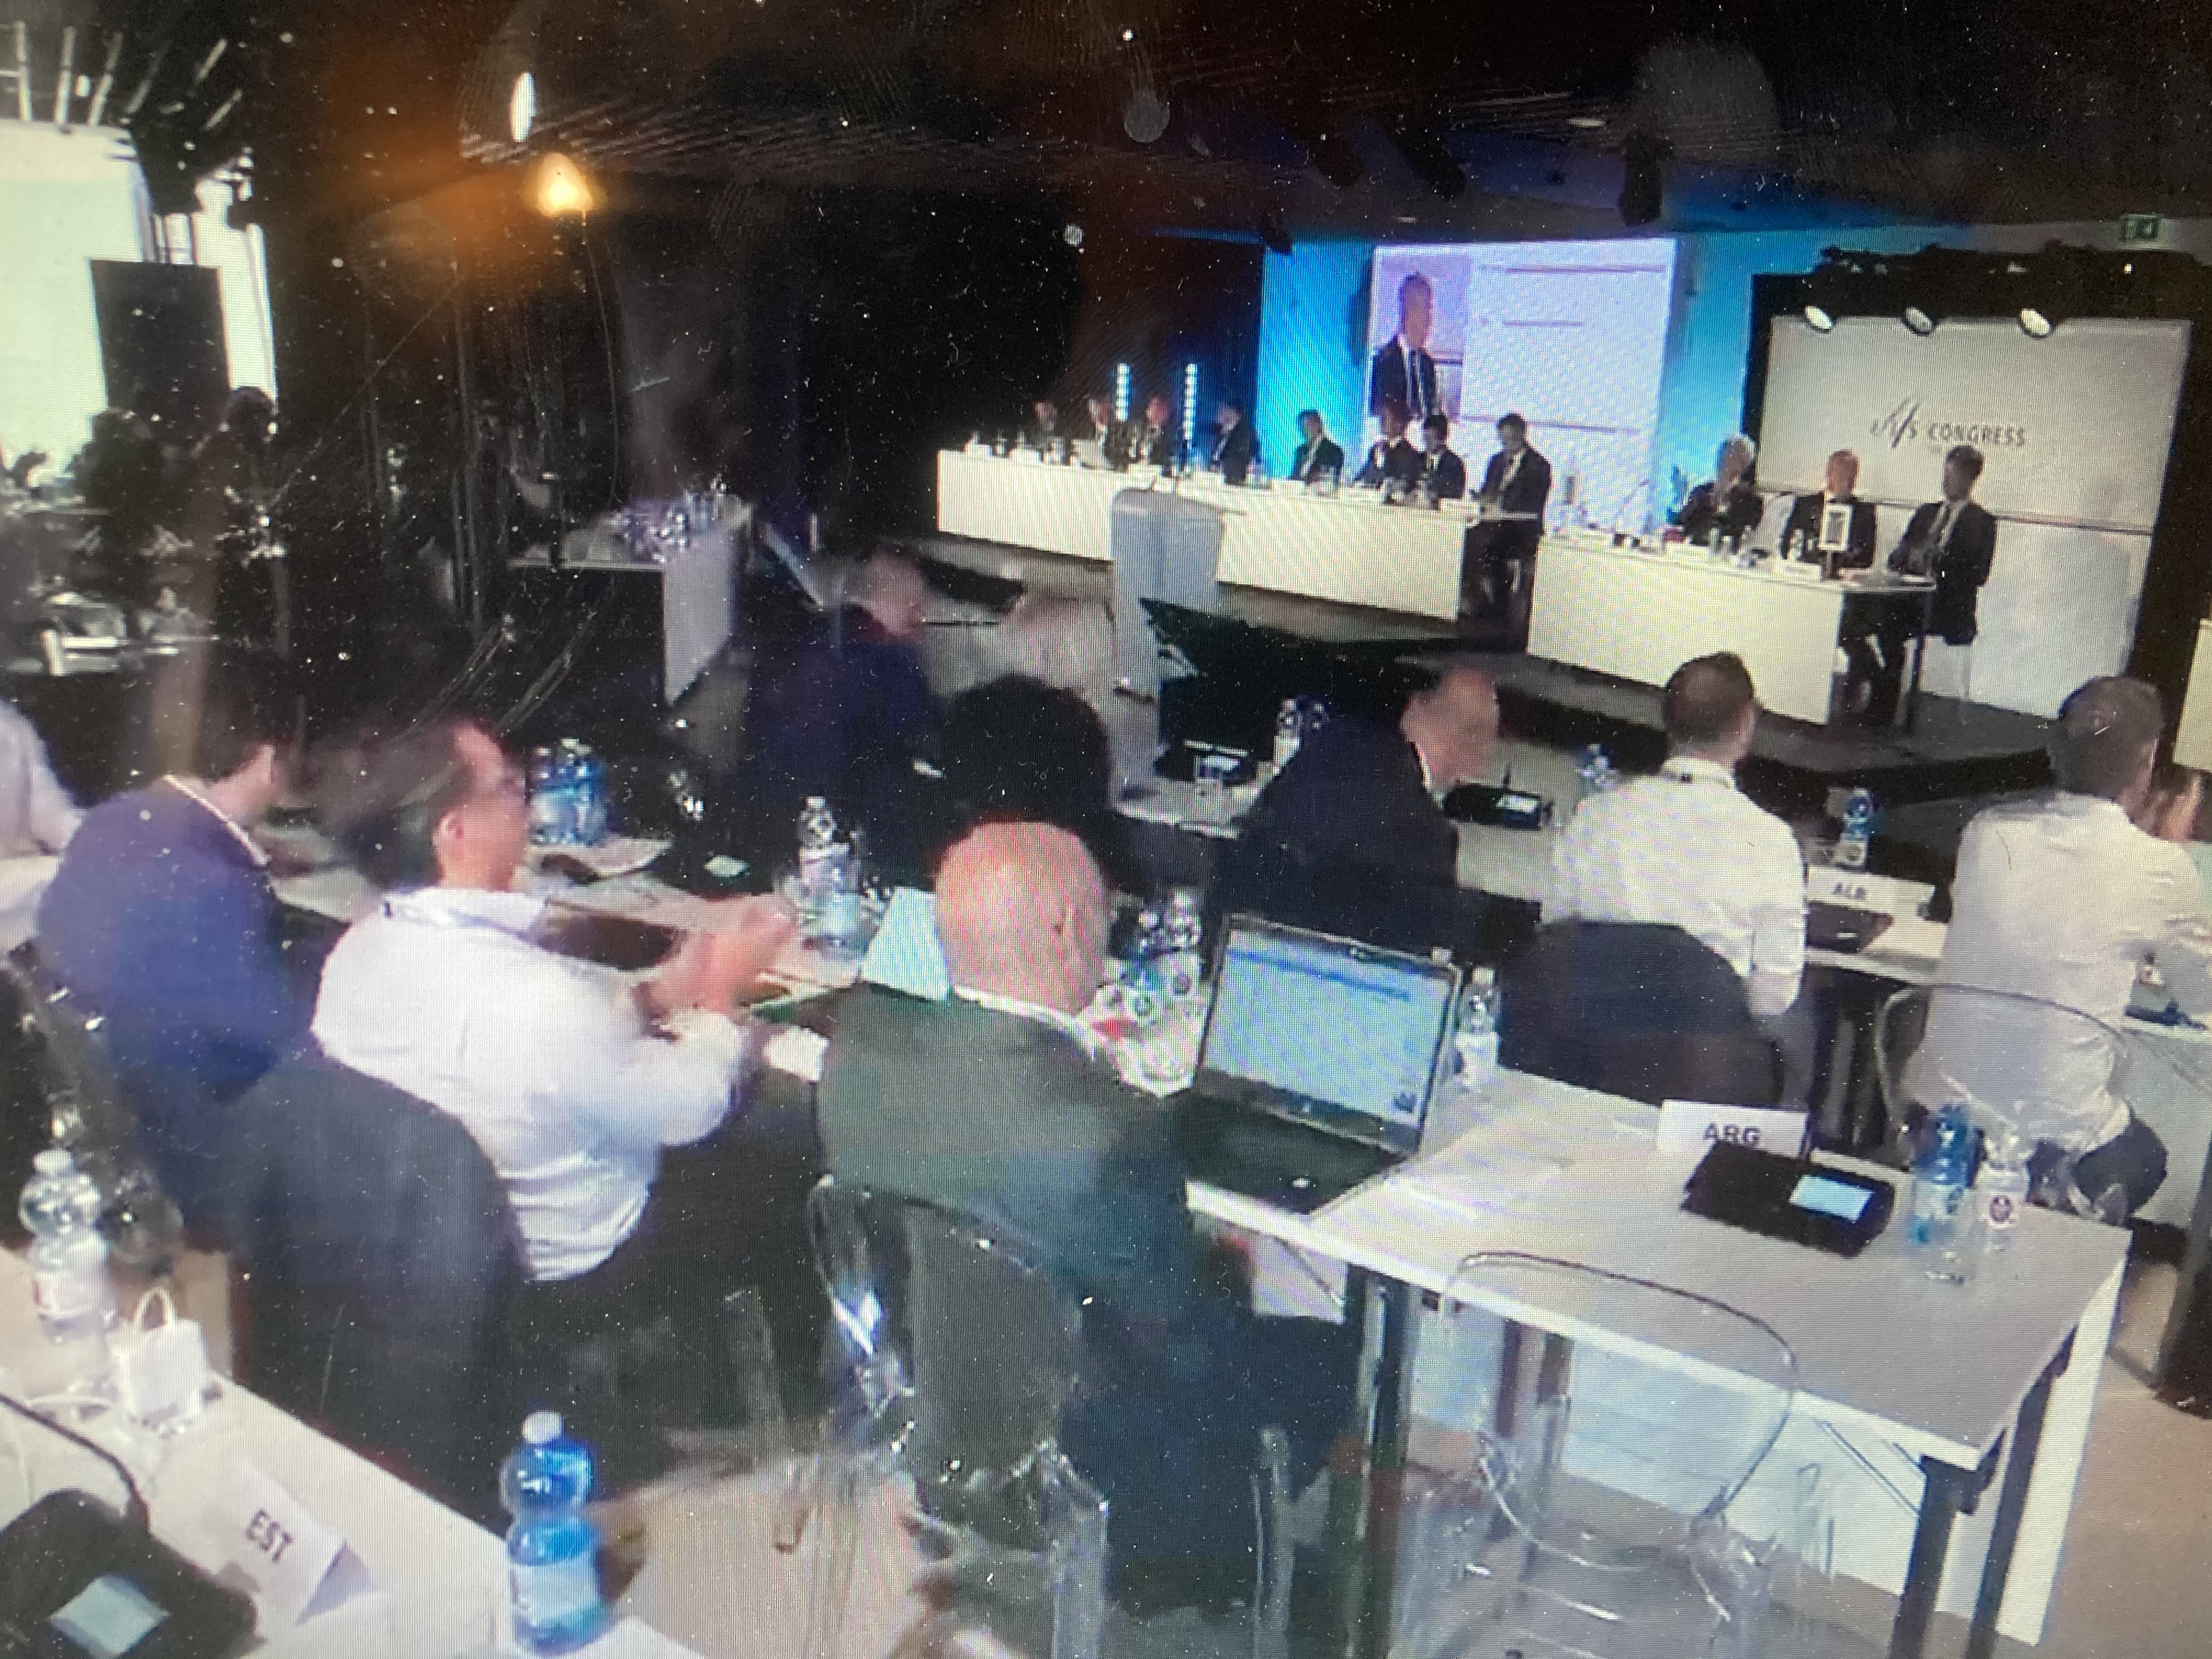 National Ski Association delegates at the FIS Congress in Milan on May 26th (FIS)